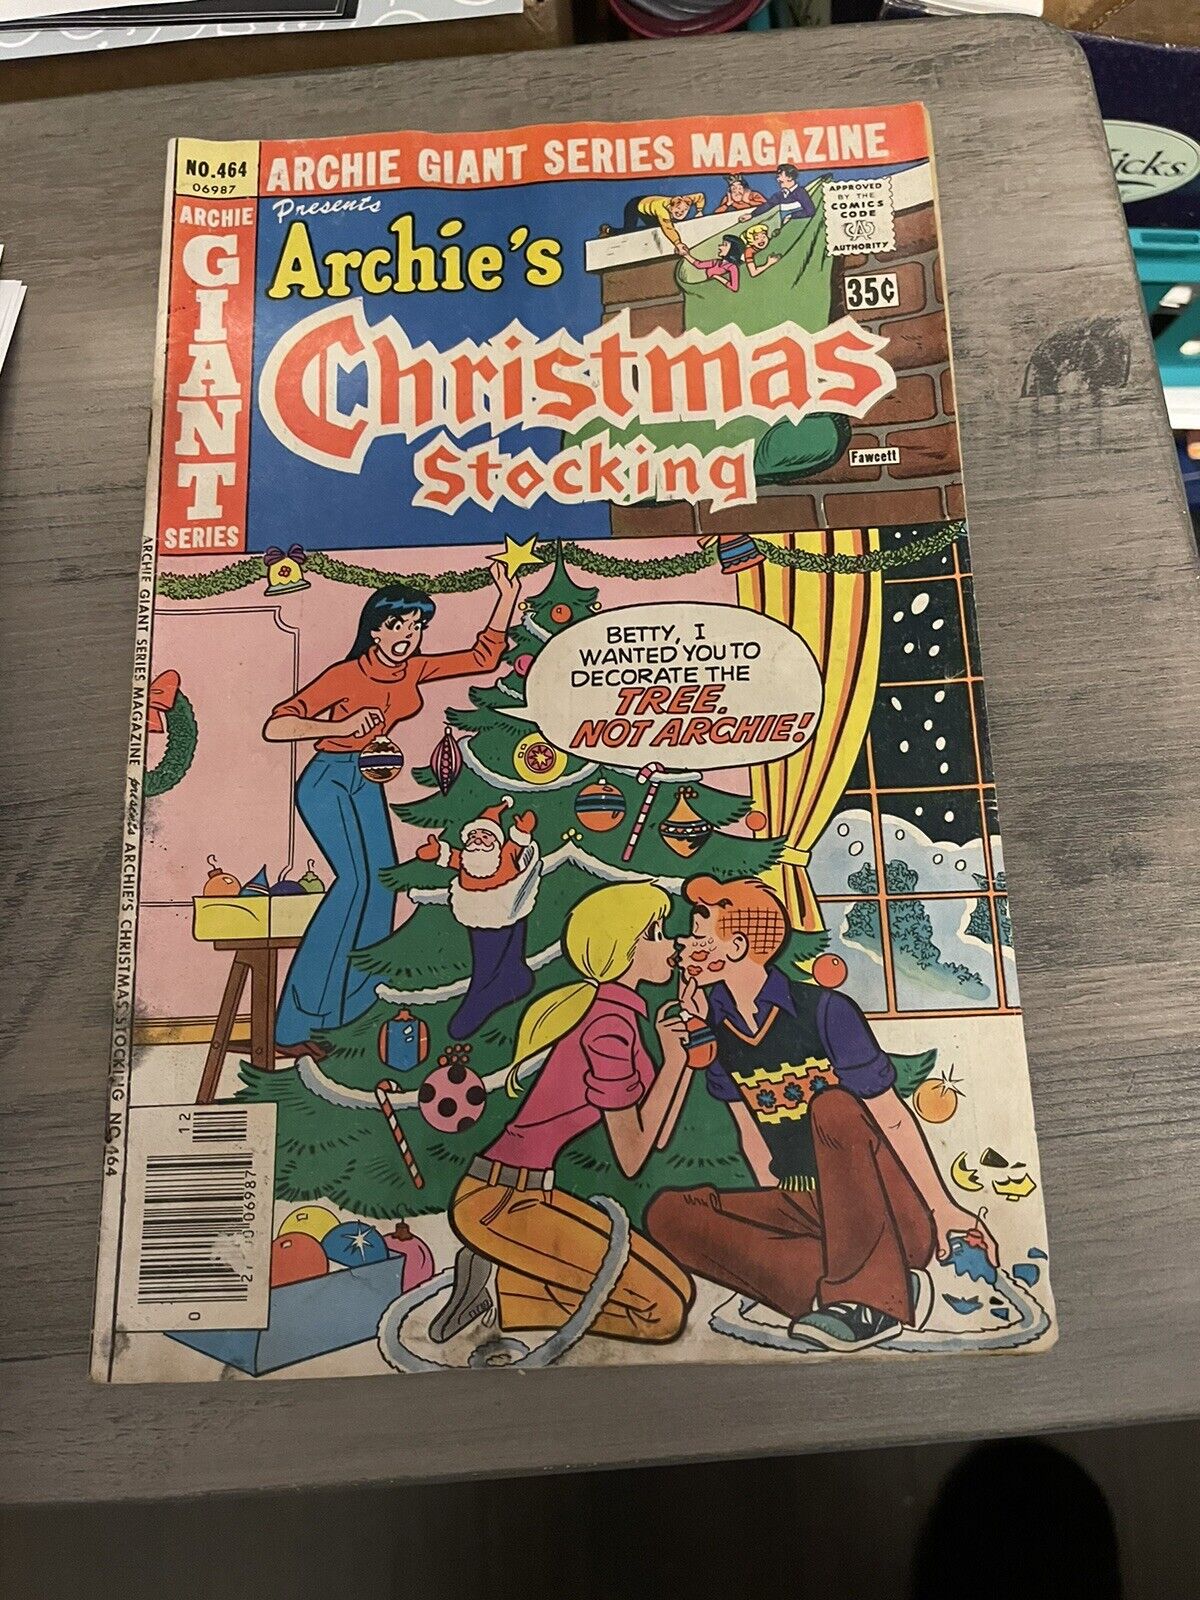 Archie Giant Series Magazine presents Archie’s Christmas Stocking No. 464 1977